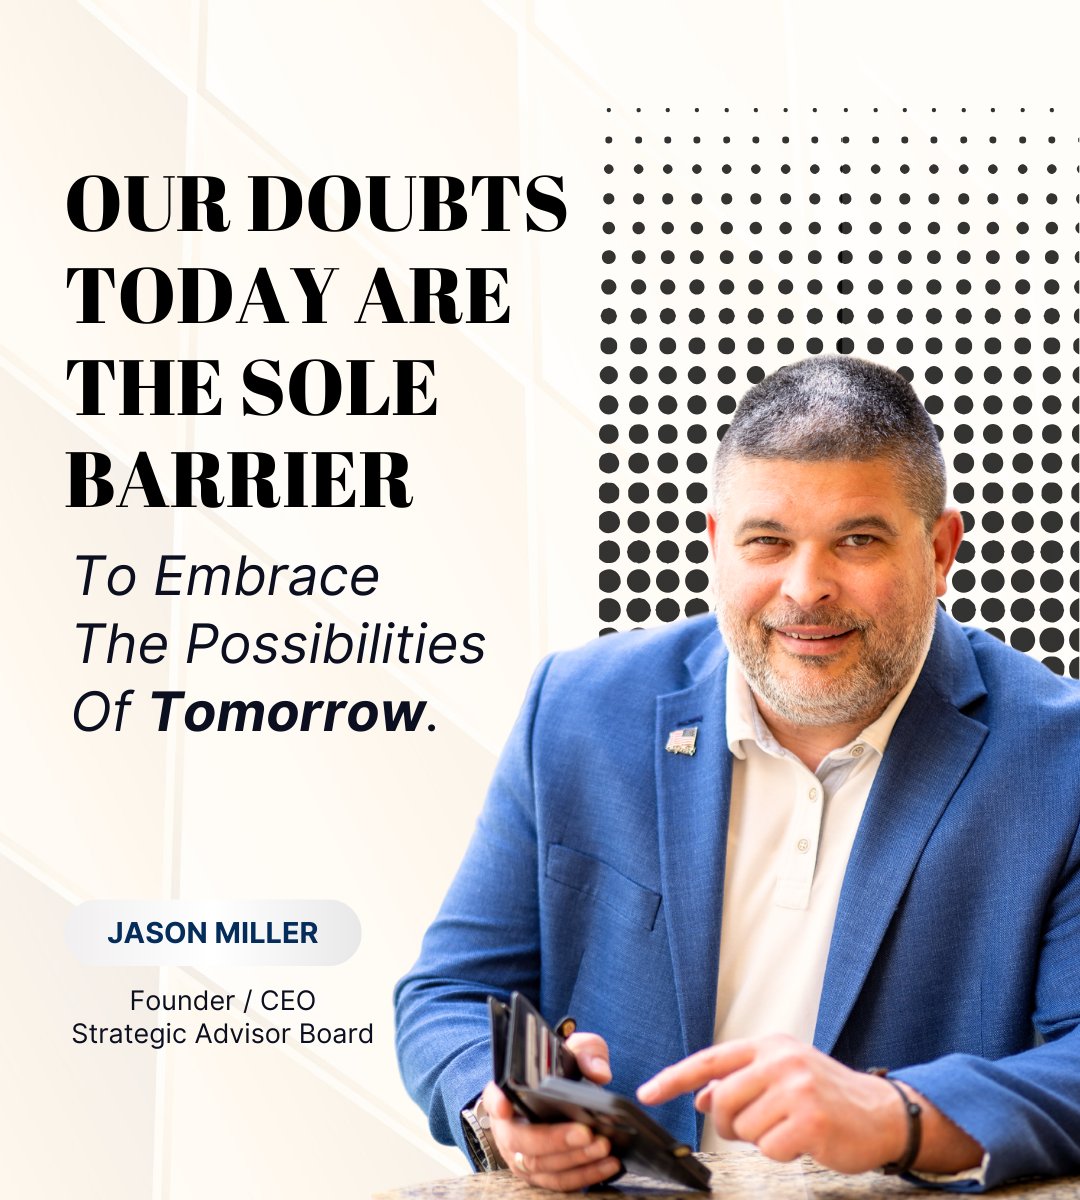 Doubts act as formidable barriers, obstructing our path to fully embracing the boundless opportunities that await us in the future.

#EmbracePossibilities #OvercomeDoubt #FutureAwaits #EndlessPotential #StrategicAdvicorBoard